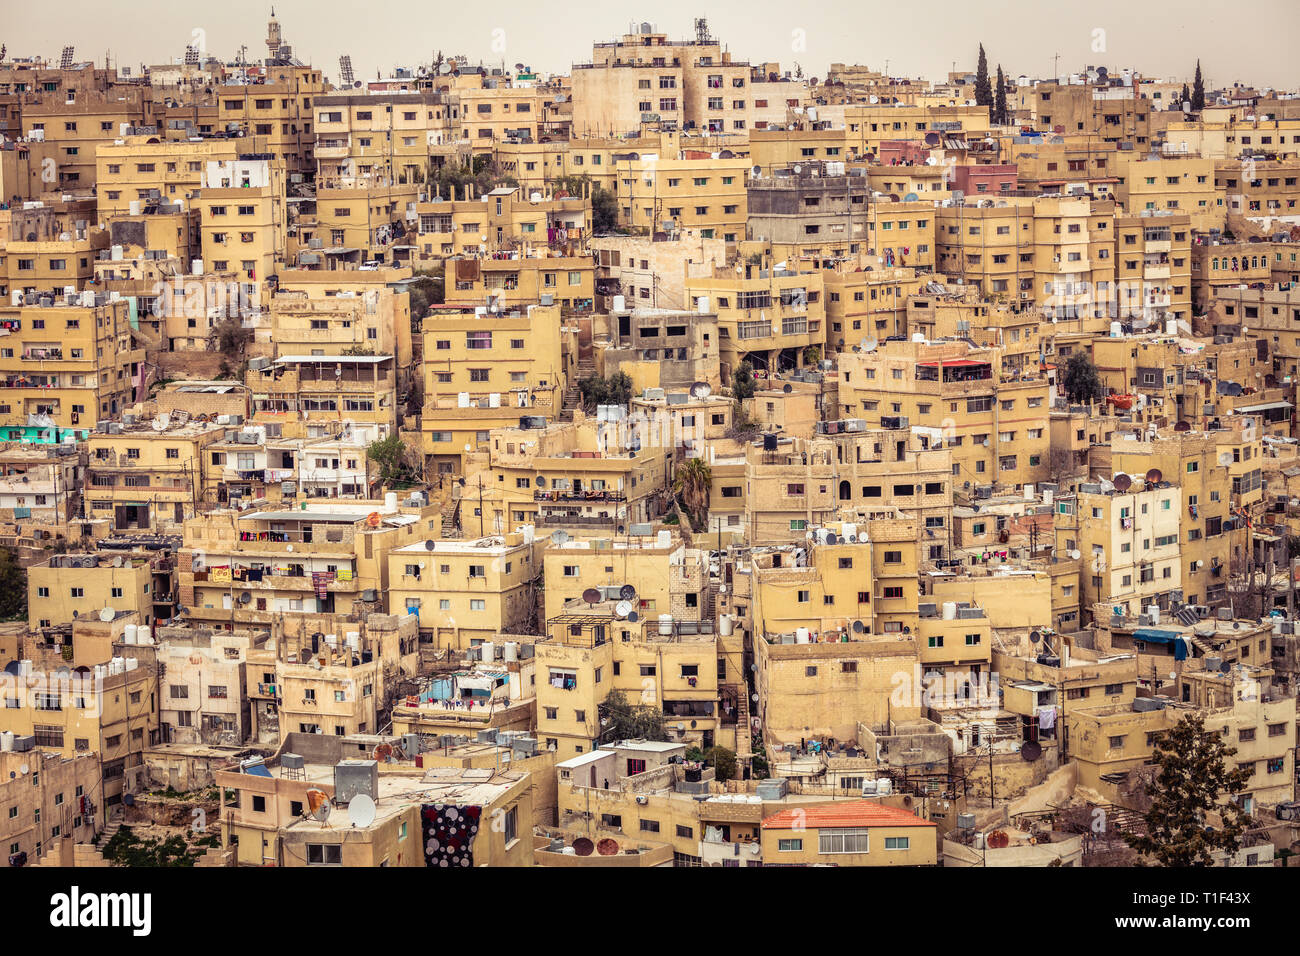 Amman, Jordan, view of the old city, a large complex of decaying buildings overlooking the citadel located on Jabal Al Qal'a. Stock Photo